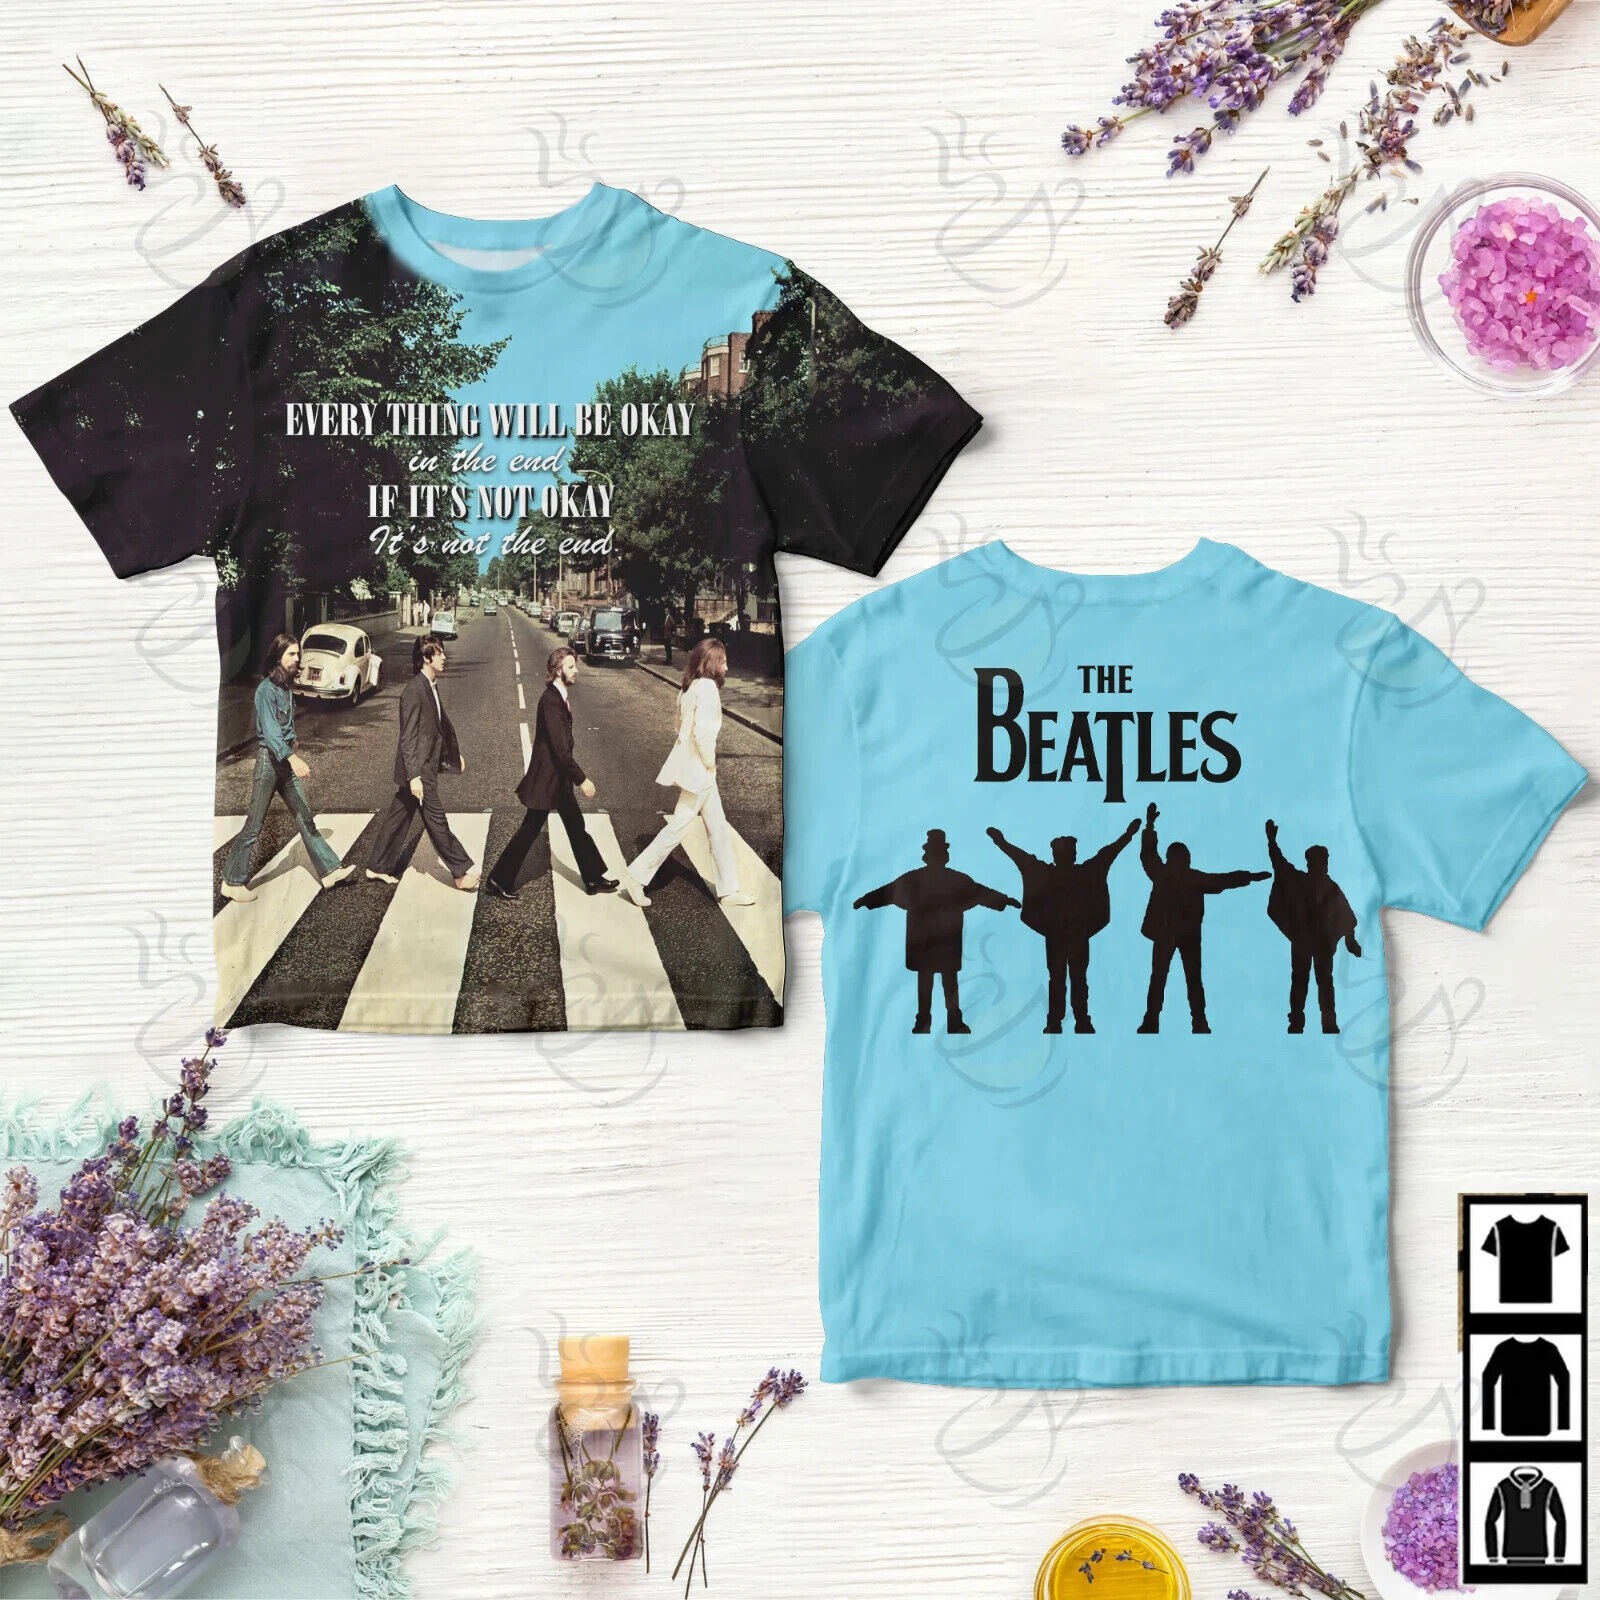 Will Be Okay The Beatles T-shirt, S-5XL Size, Music Lovers